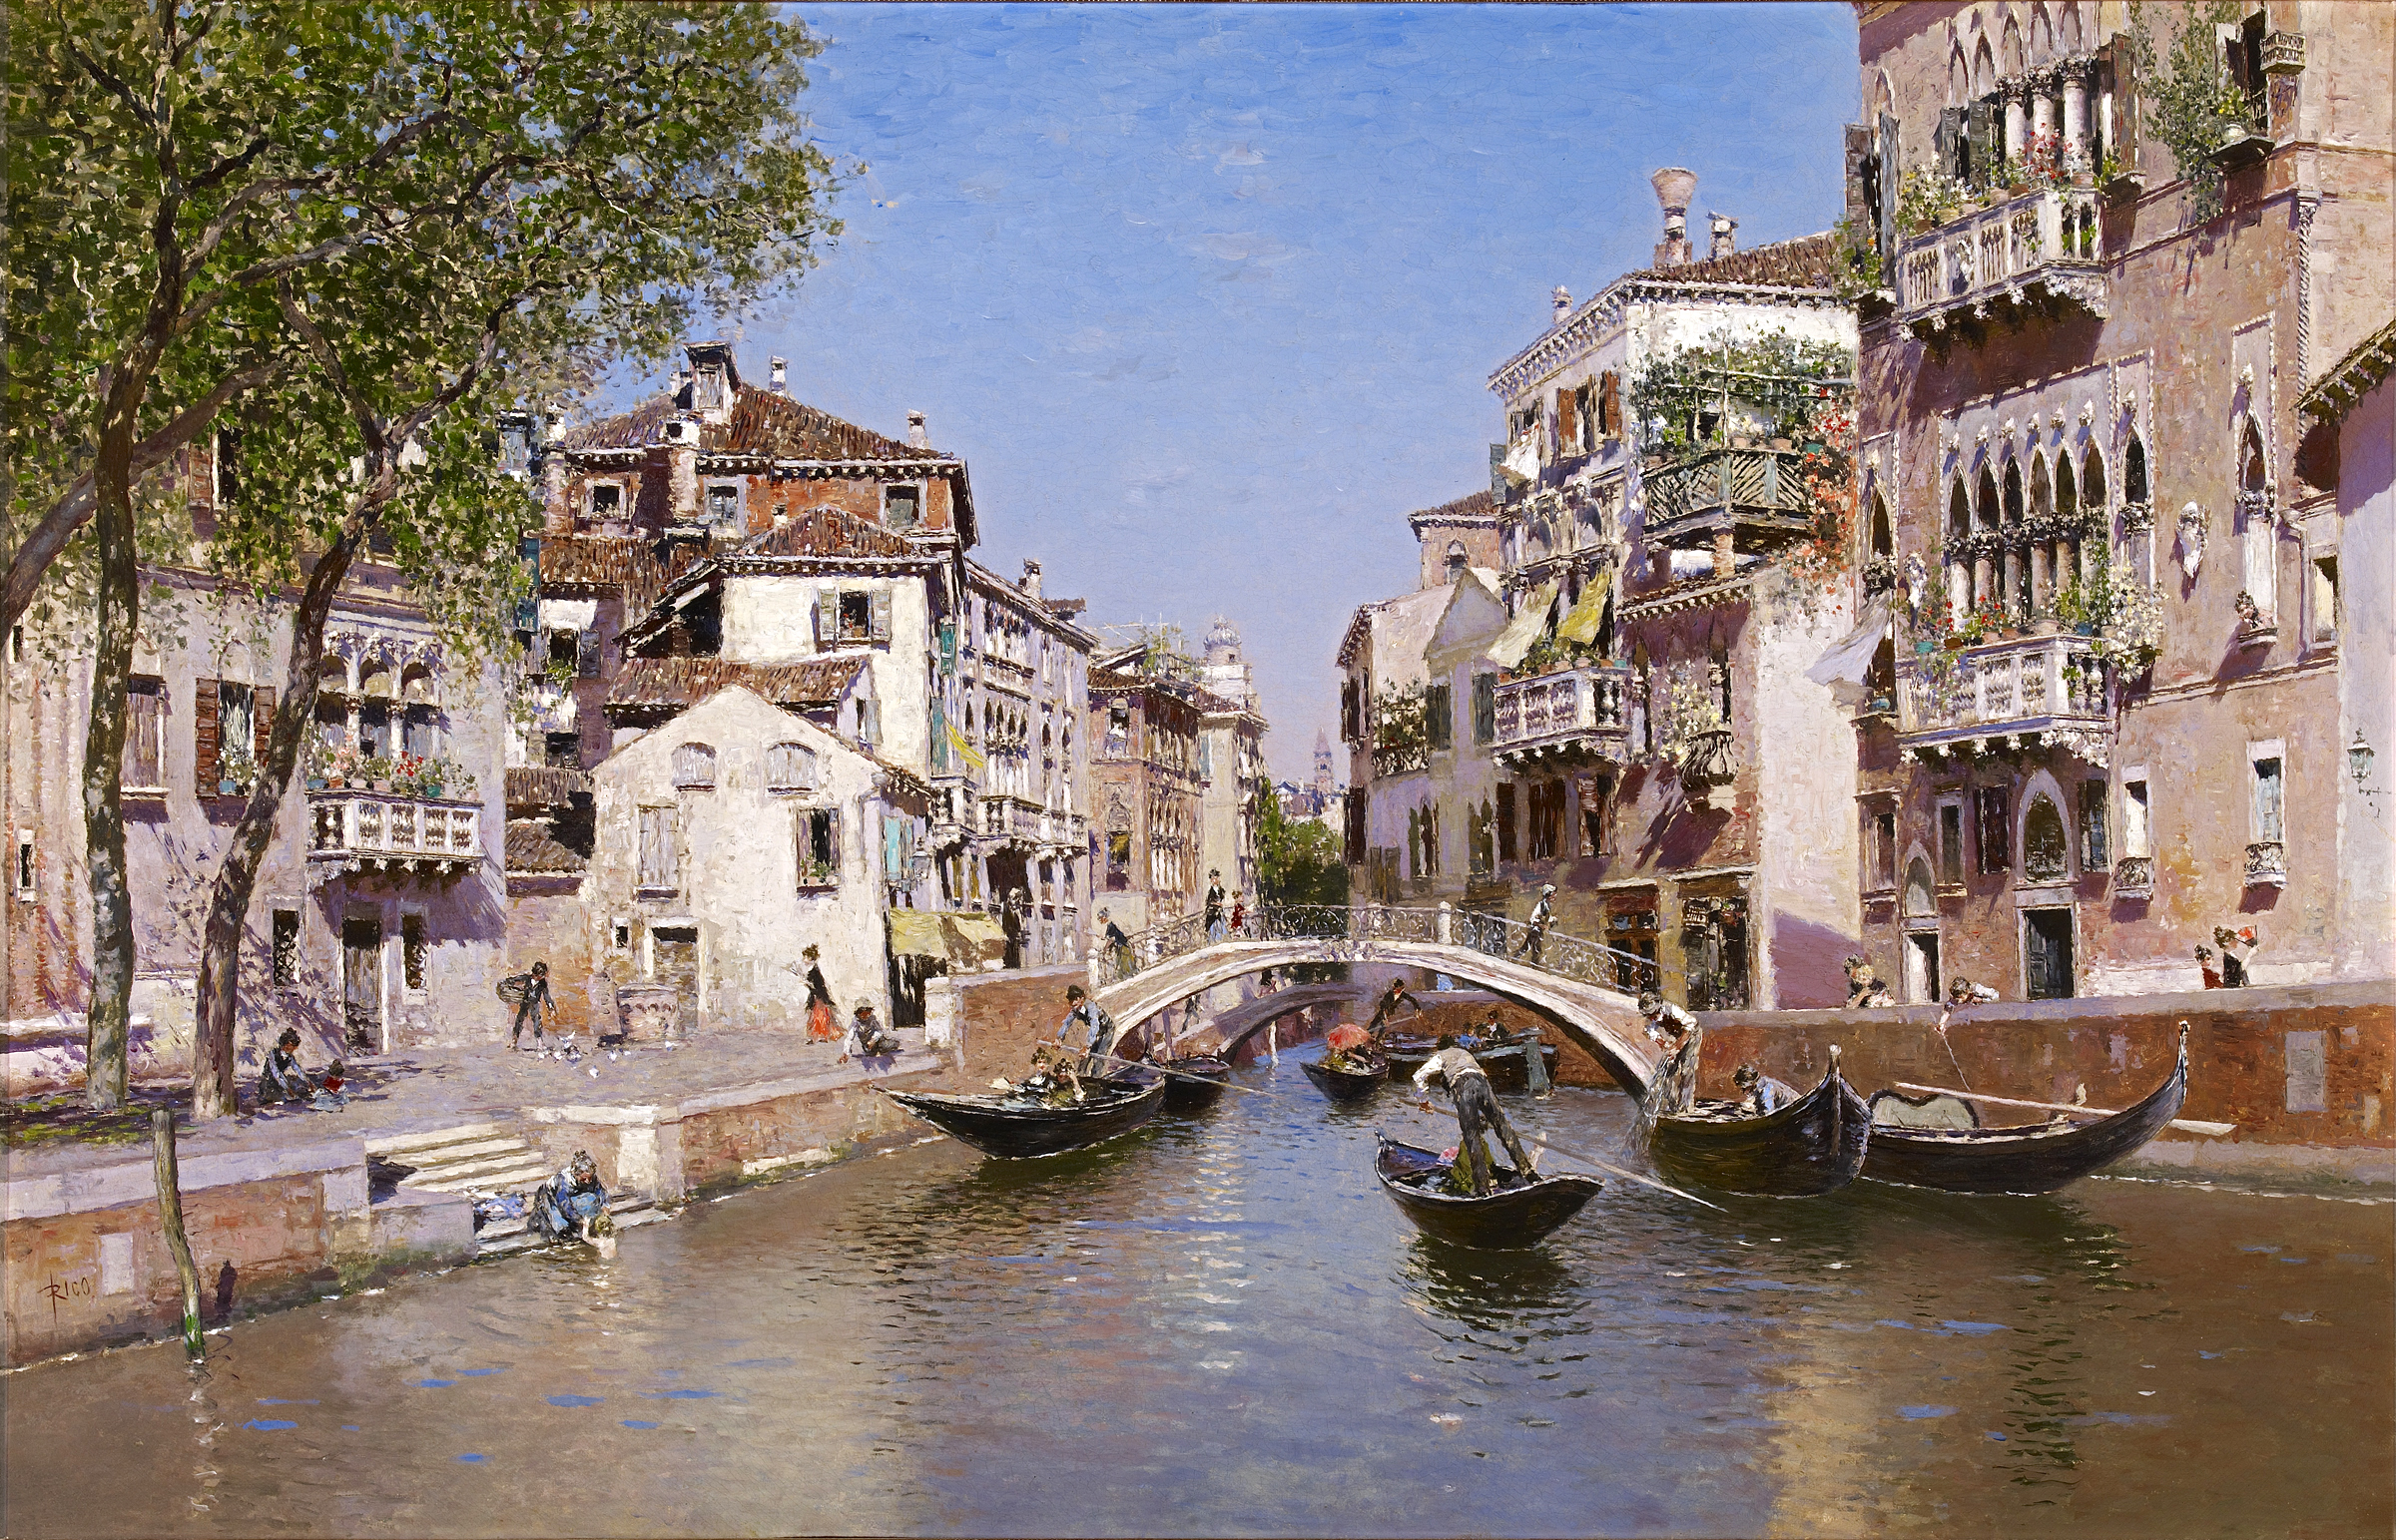 Martín Rico y Ortega (Spanish, 1833-1908), Rio San Trovaso, Venice, c. 1903. Oil on canvas. Meadows Museum, SMU, Dallas. Museum purchase with funds from The Meadows Foundation, MM.07.01. Photo by Michael Bodycomb.